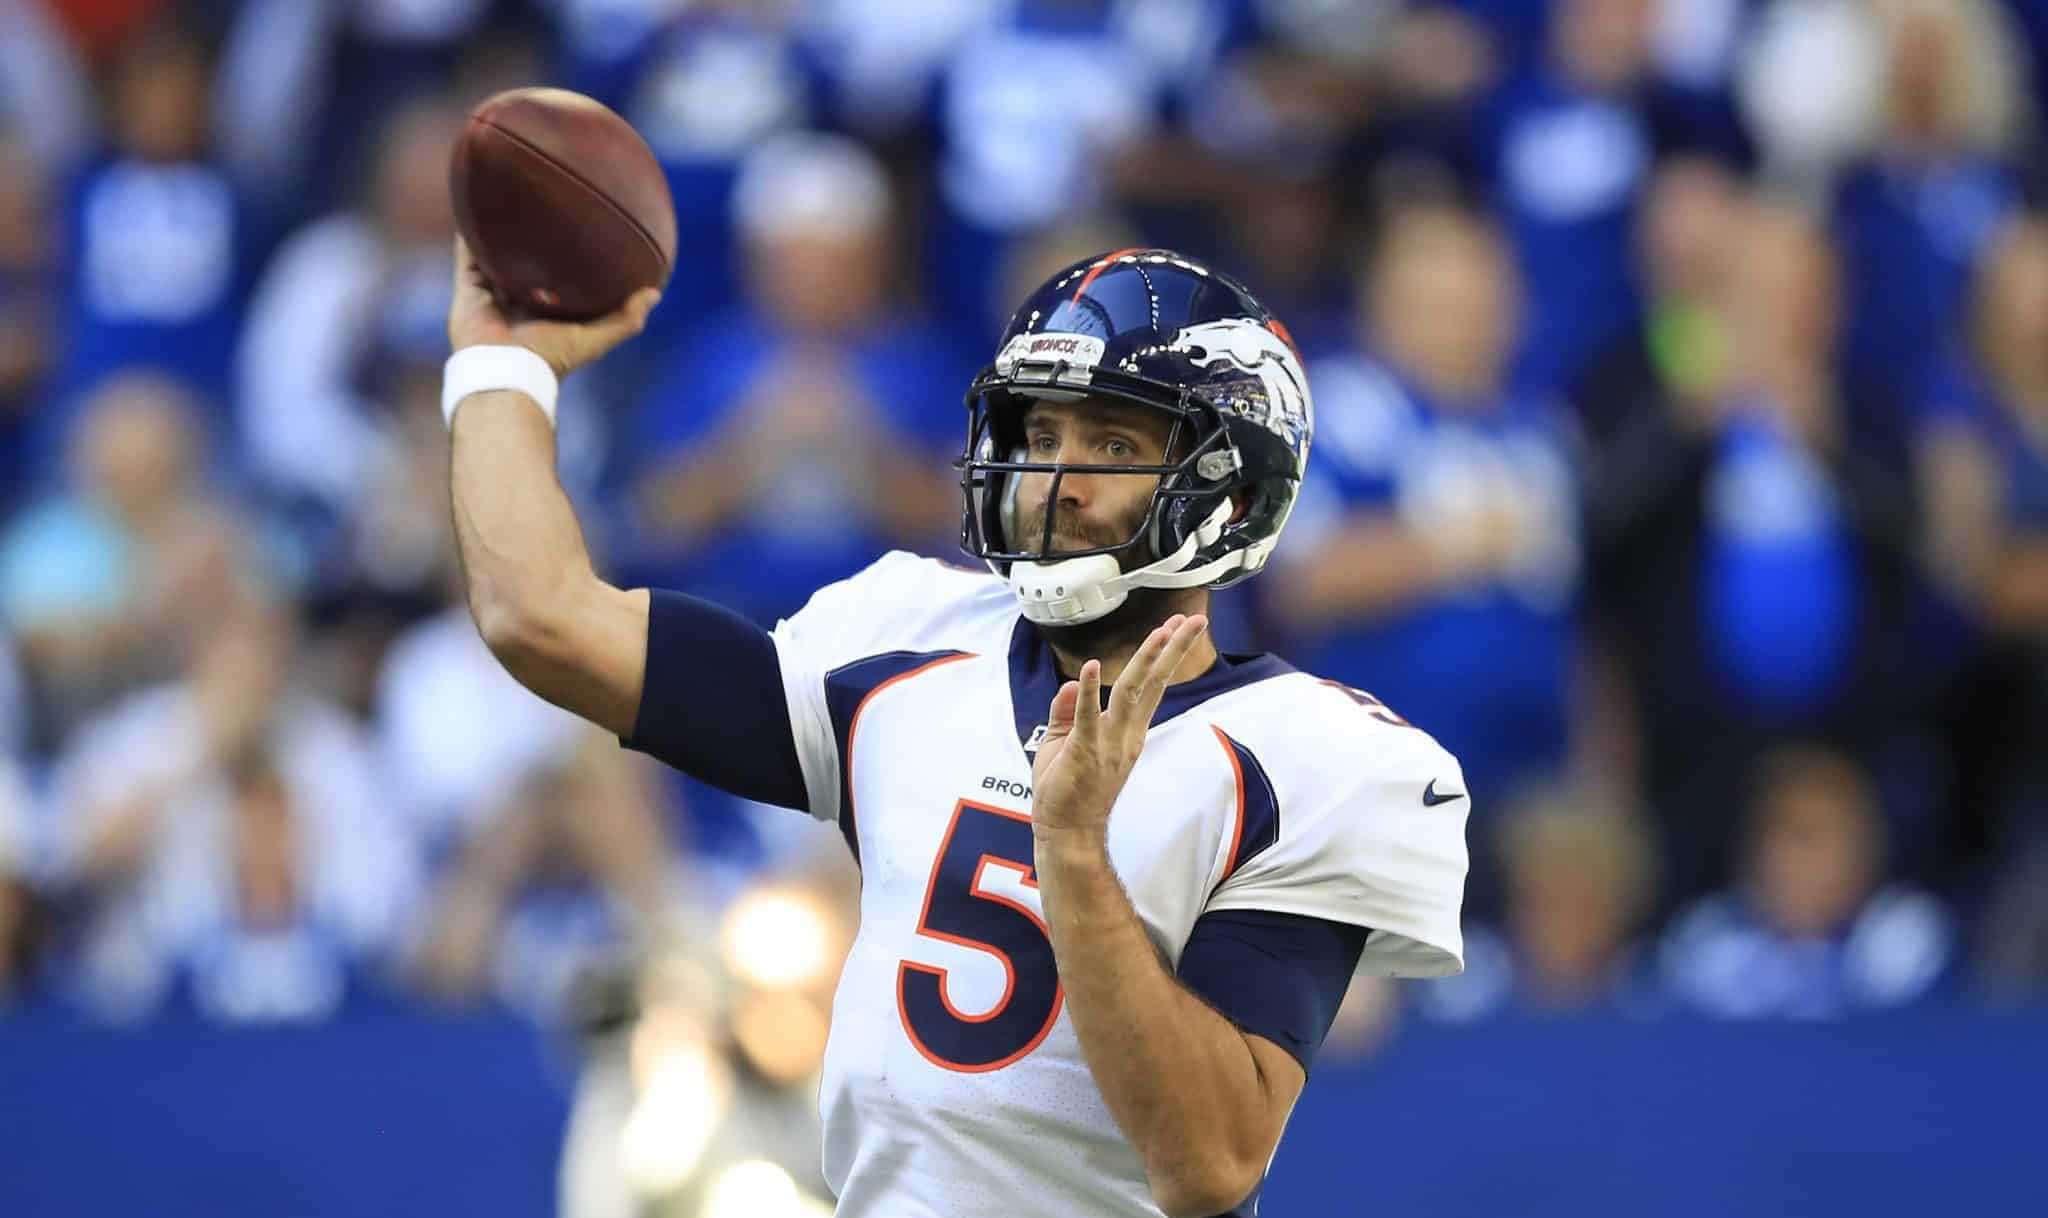 INDIANAPOLIS, INDIANA - OCTOBER 27: Joe Flacco #5 of the Denver Broncos throws a pass against the Indianapolis Colts at Lucas Oil Stadium on October 27, 2019 in Indianapolis, Indiana. New York Jets